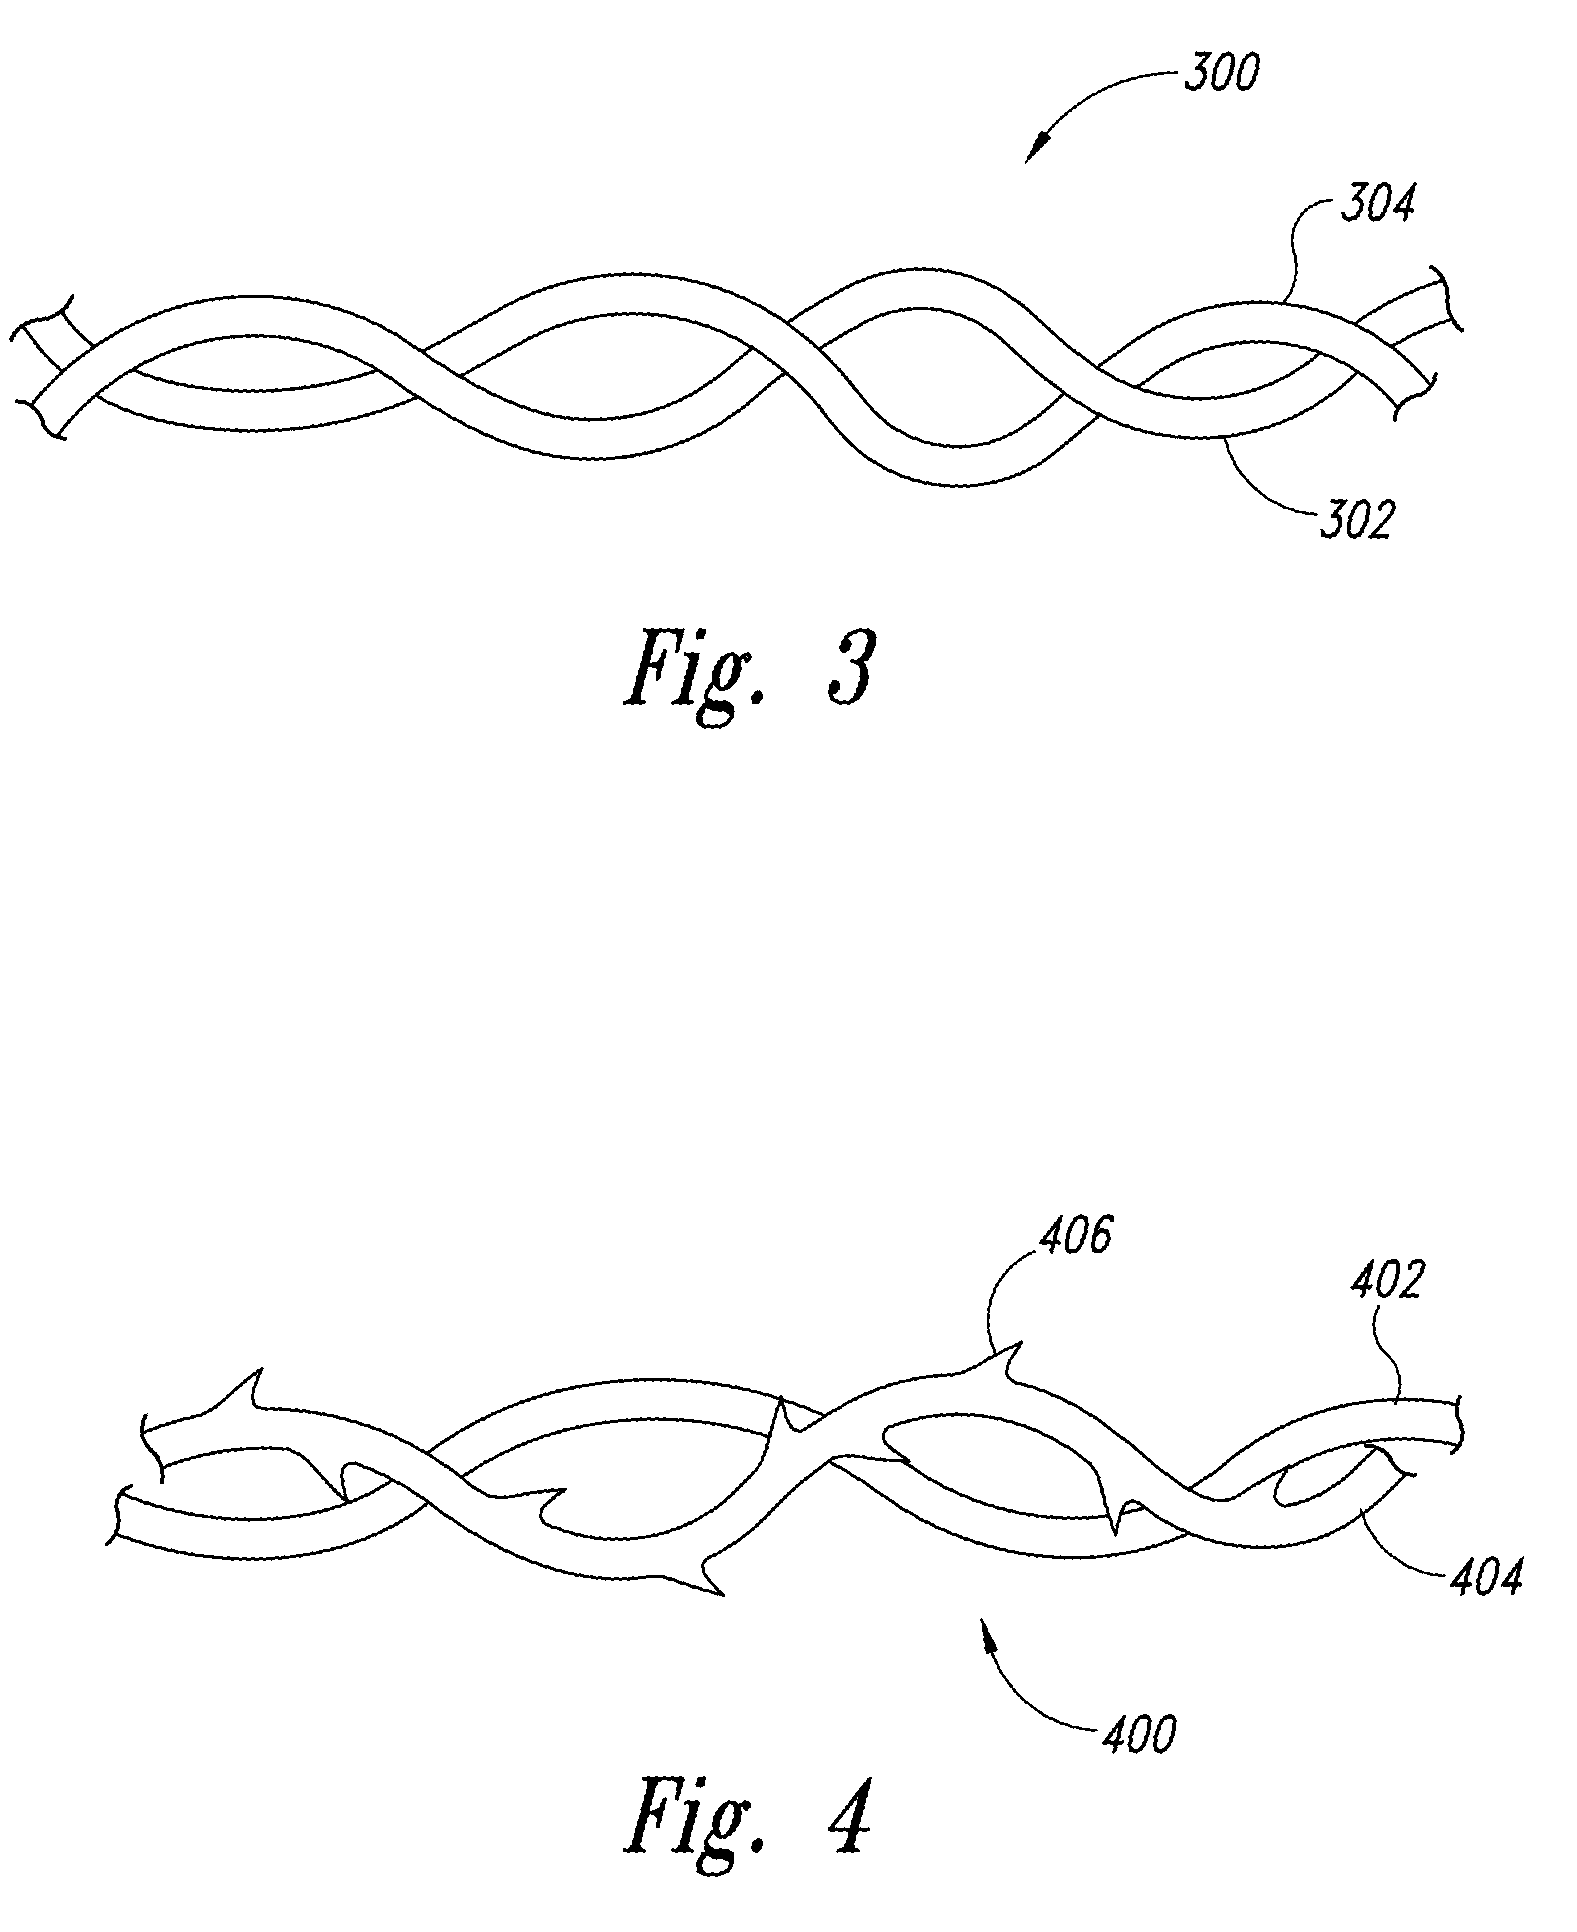 Coatings for modifying monofilament and multi-filaments self-retaining sutures